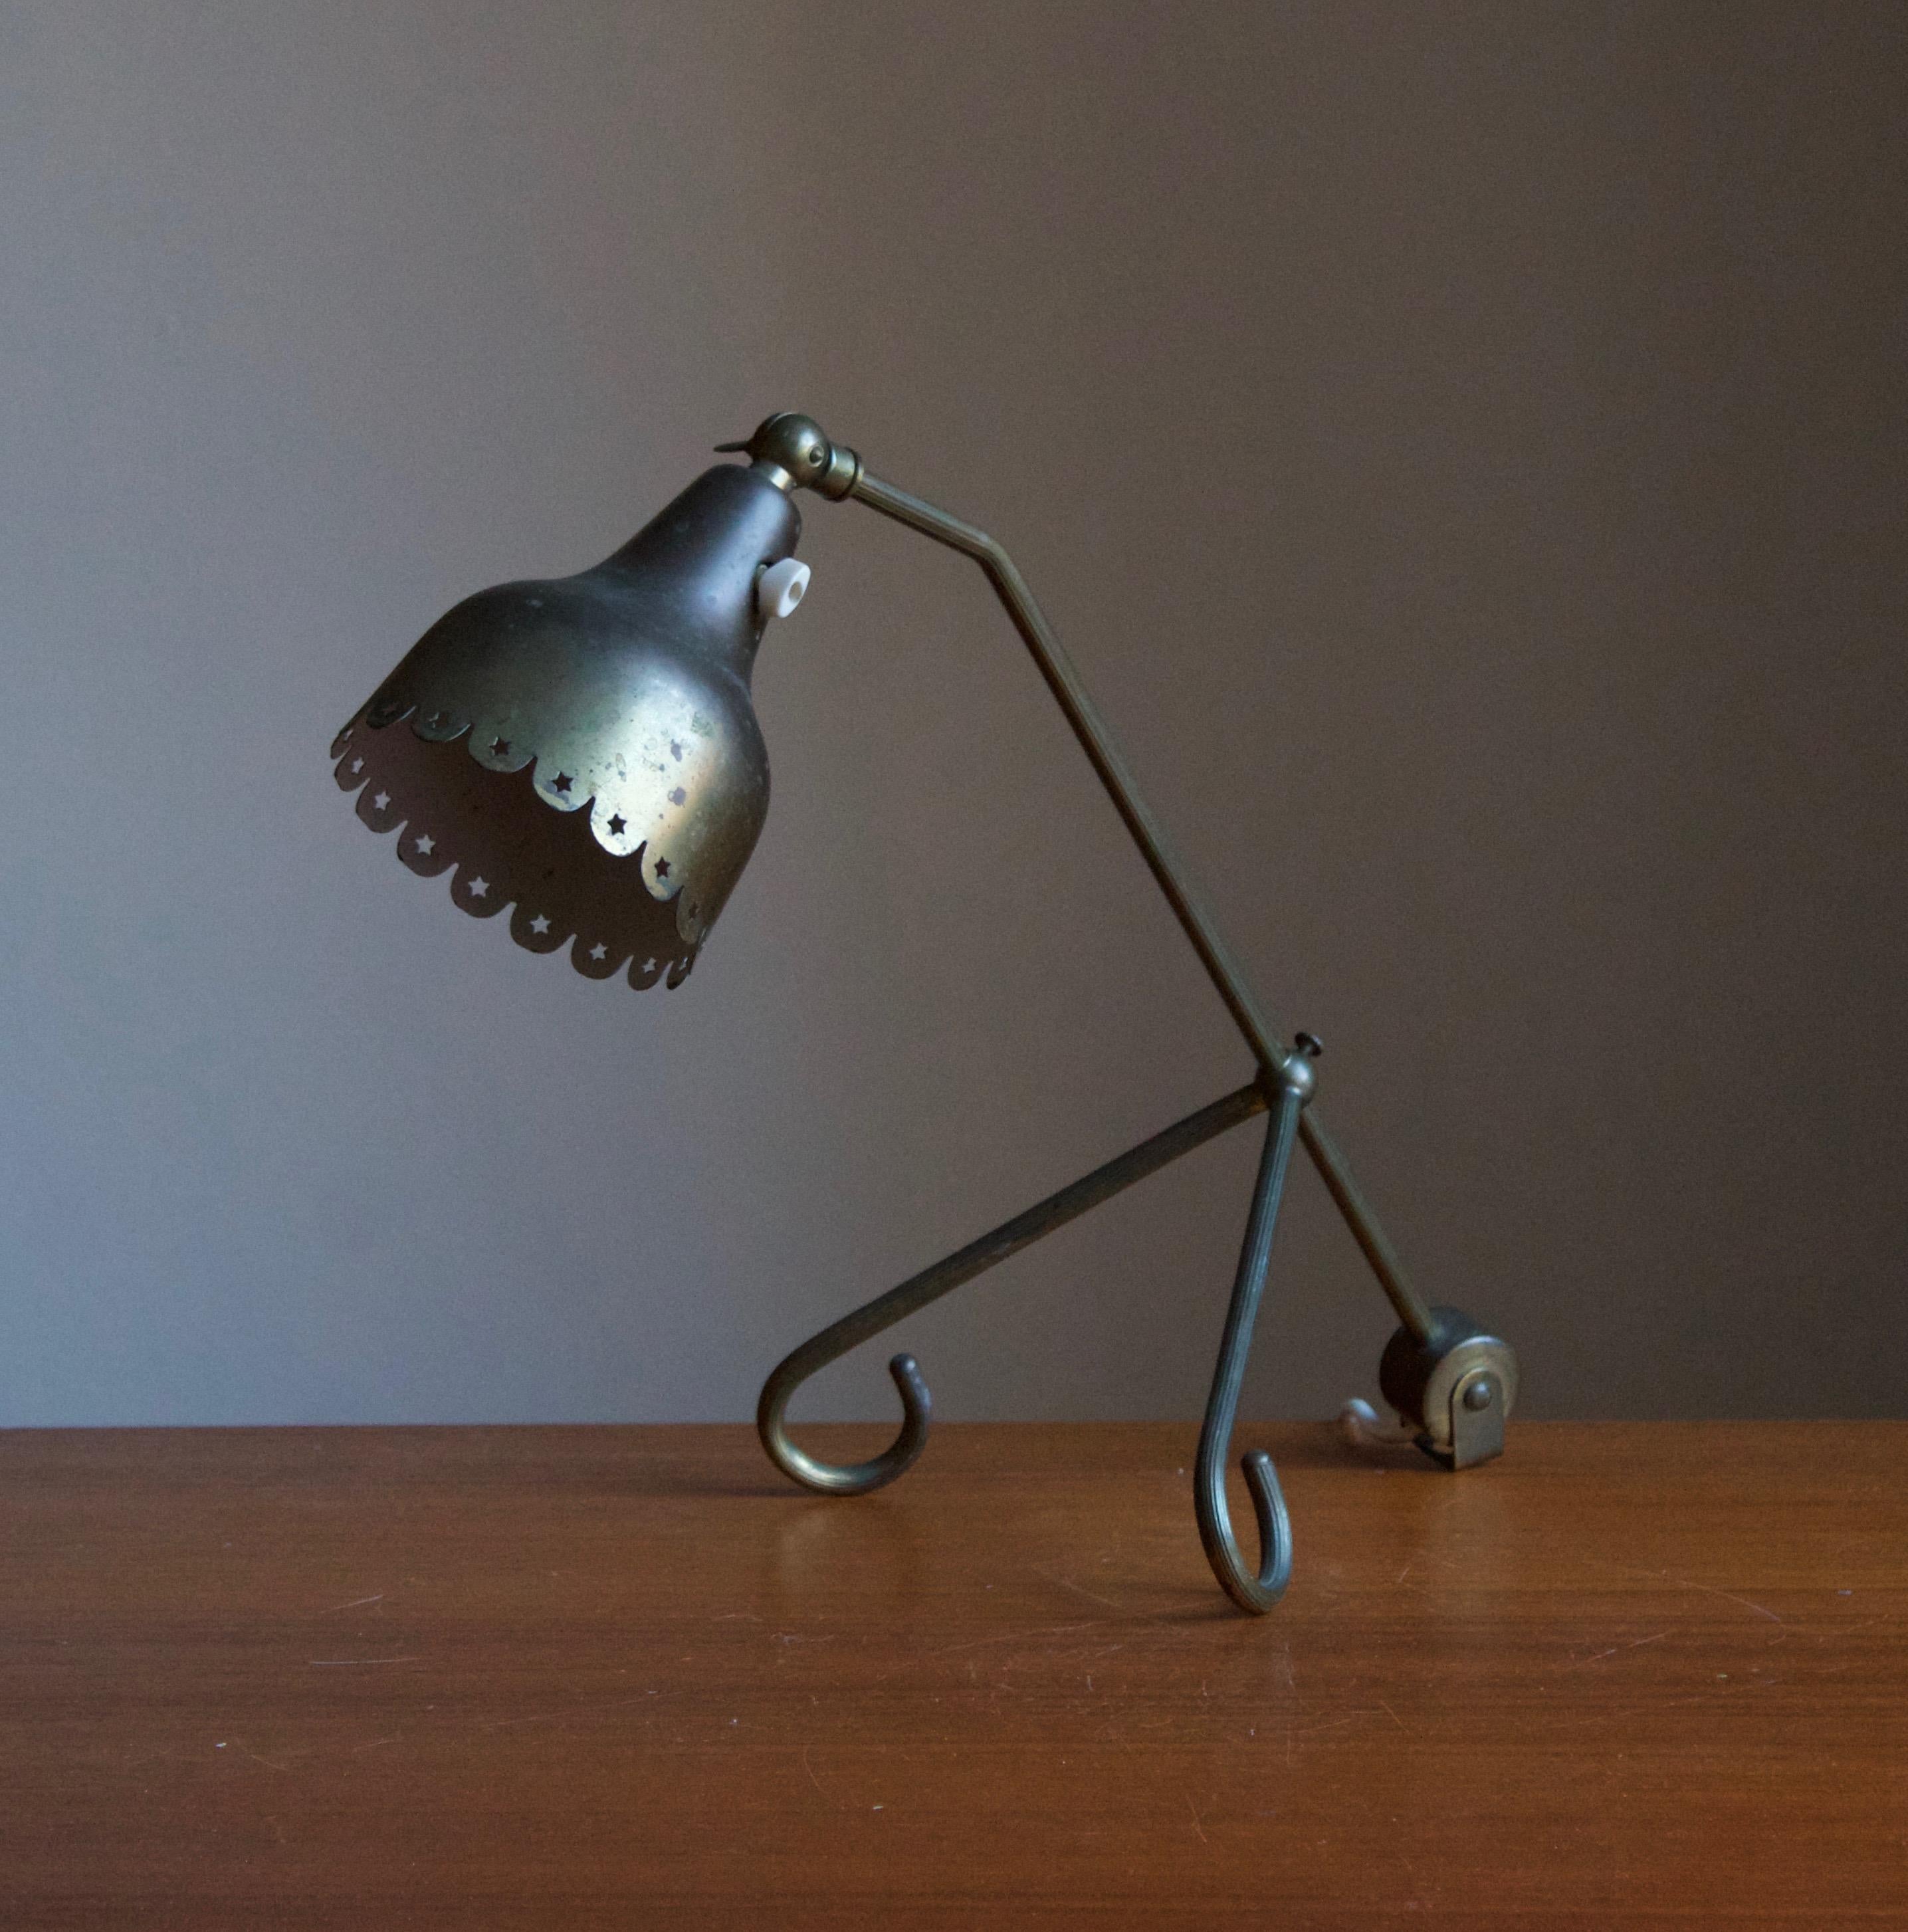 A table lamp / desk light, by Svend Aage Holm Sørensen, Denmark, 1950s. Adjustable, and can be utilized as a wall light in addition.

Other designers of the period include Paavo Tynell, Serge Mouille, Josef Frank, Angelo Lelii, and Lisa